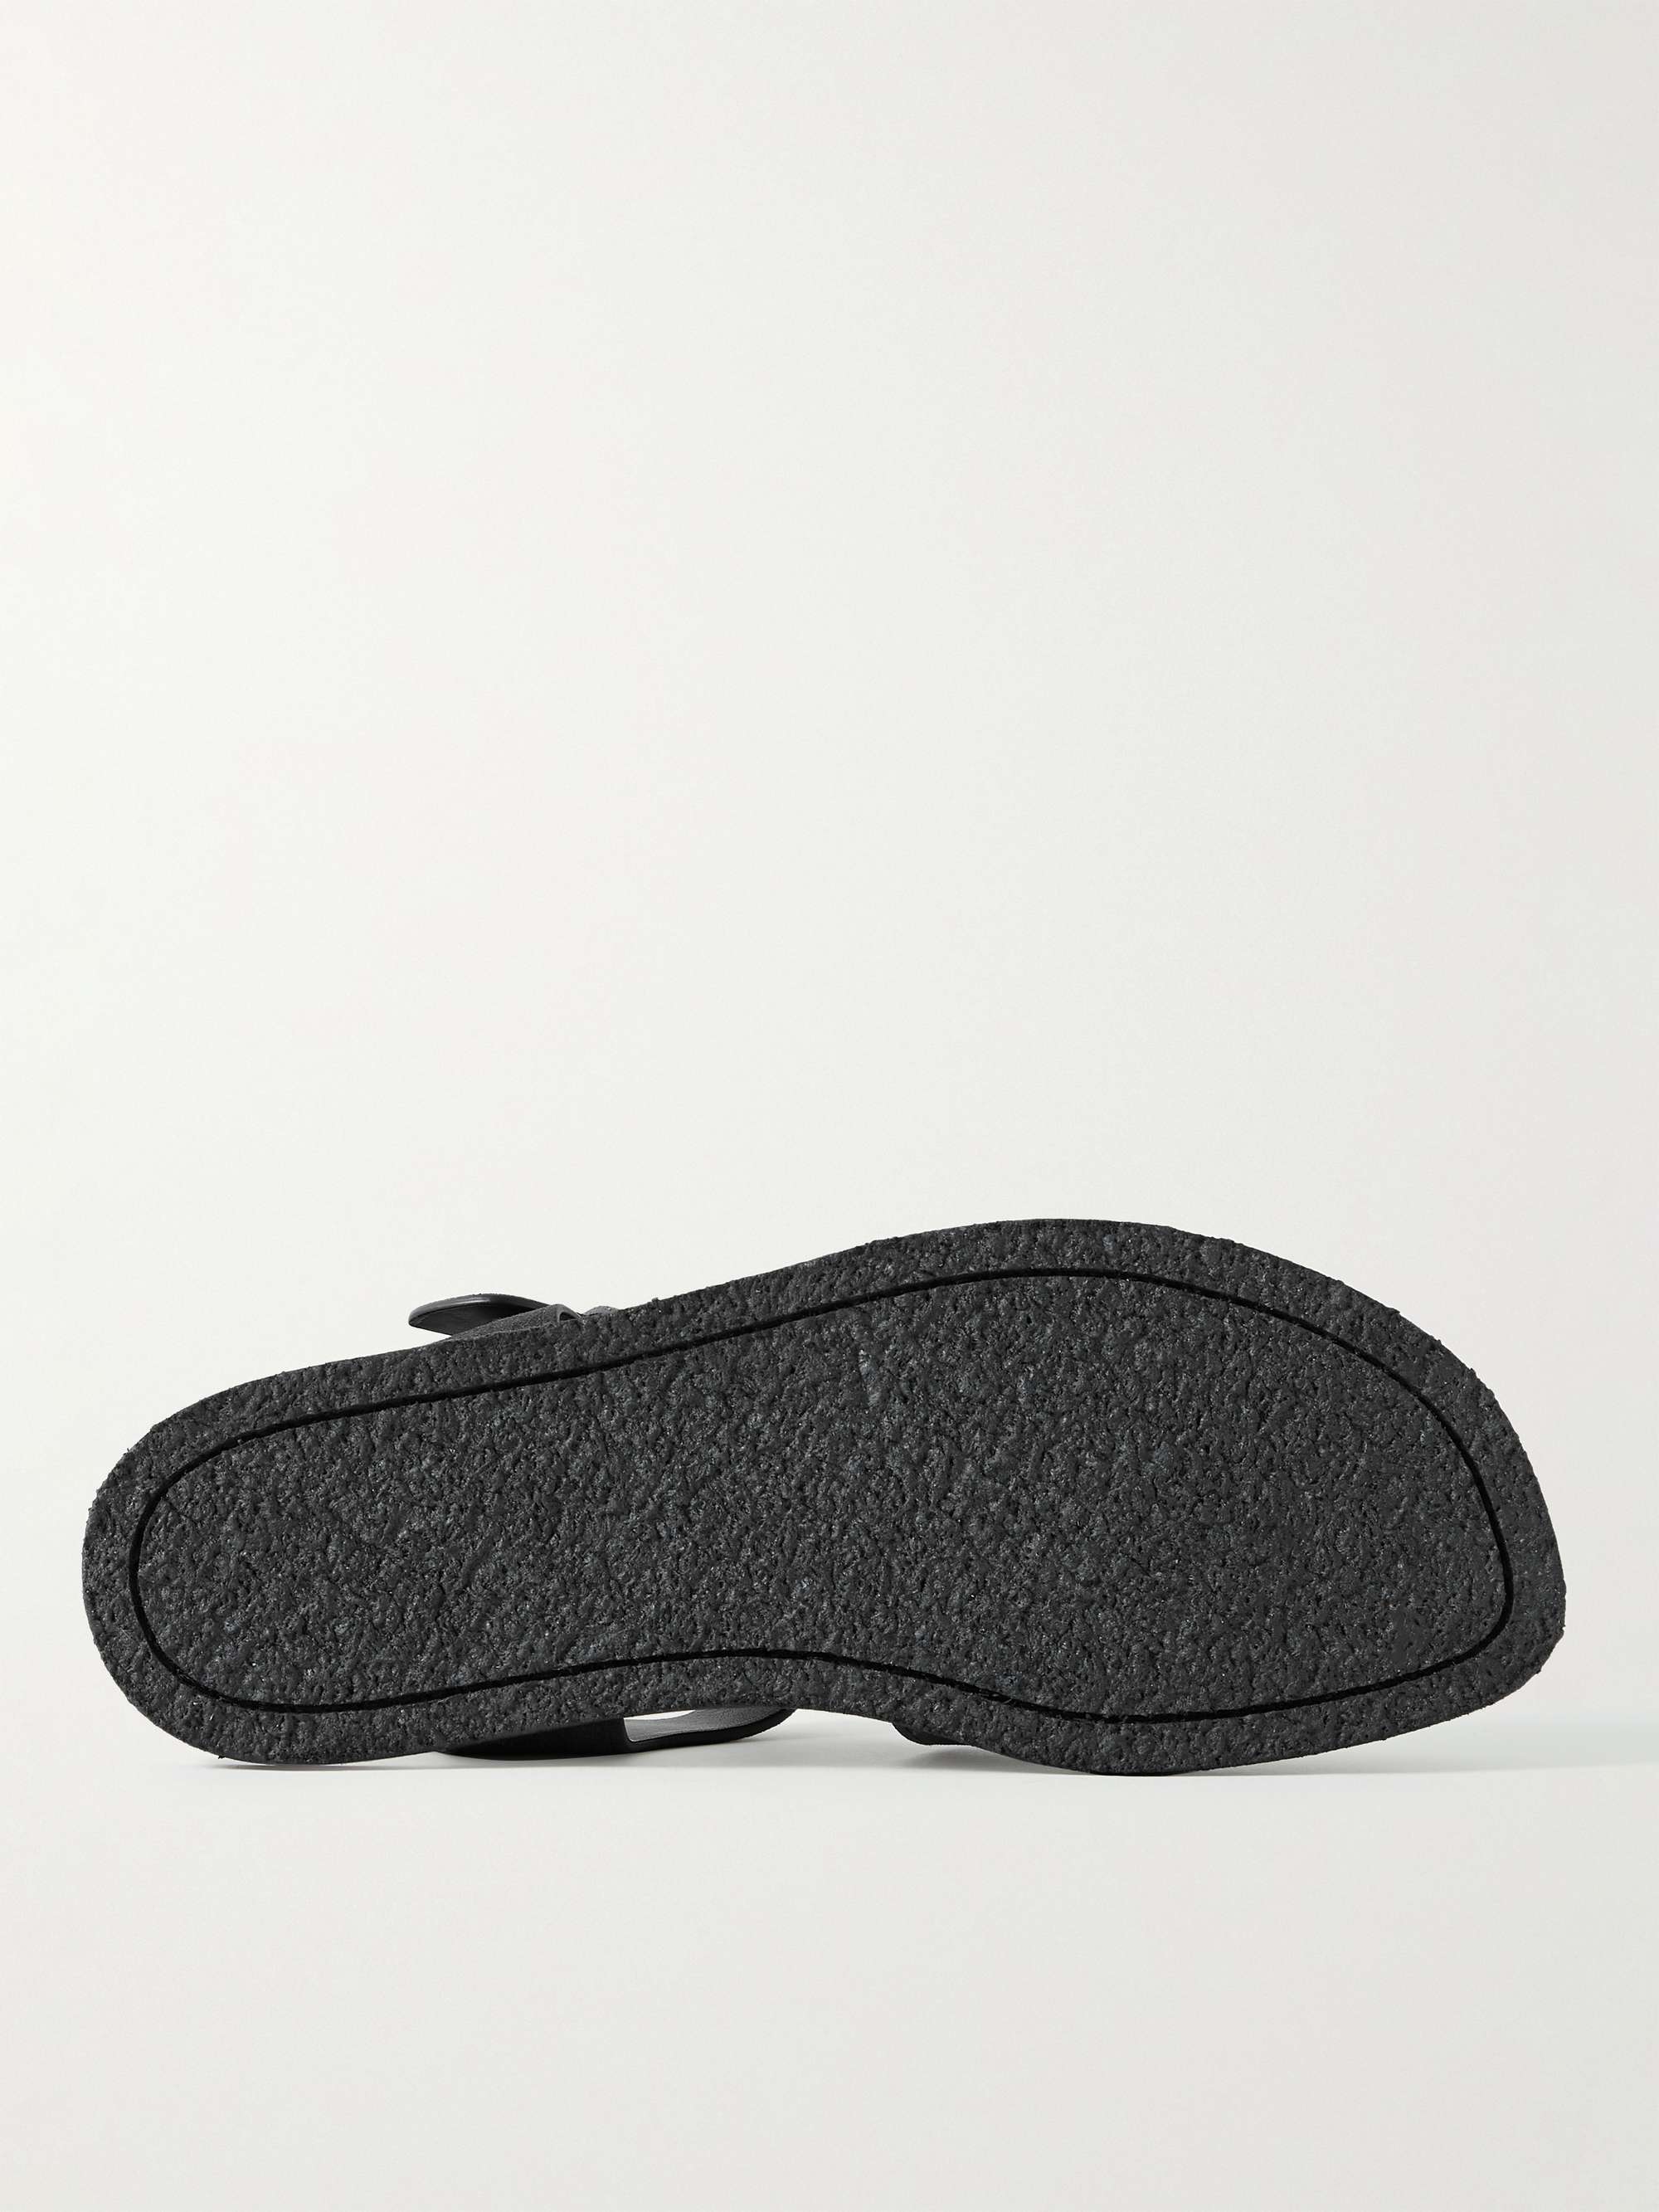 THE ROW Fisherman Suede Sandals for Men | MR PORTER